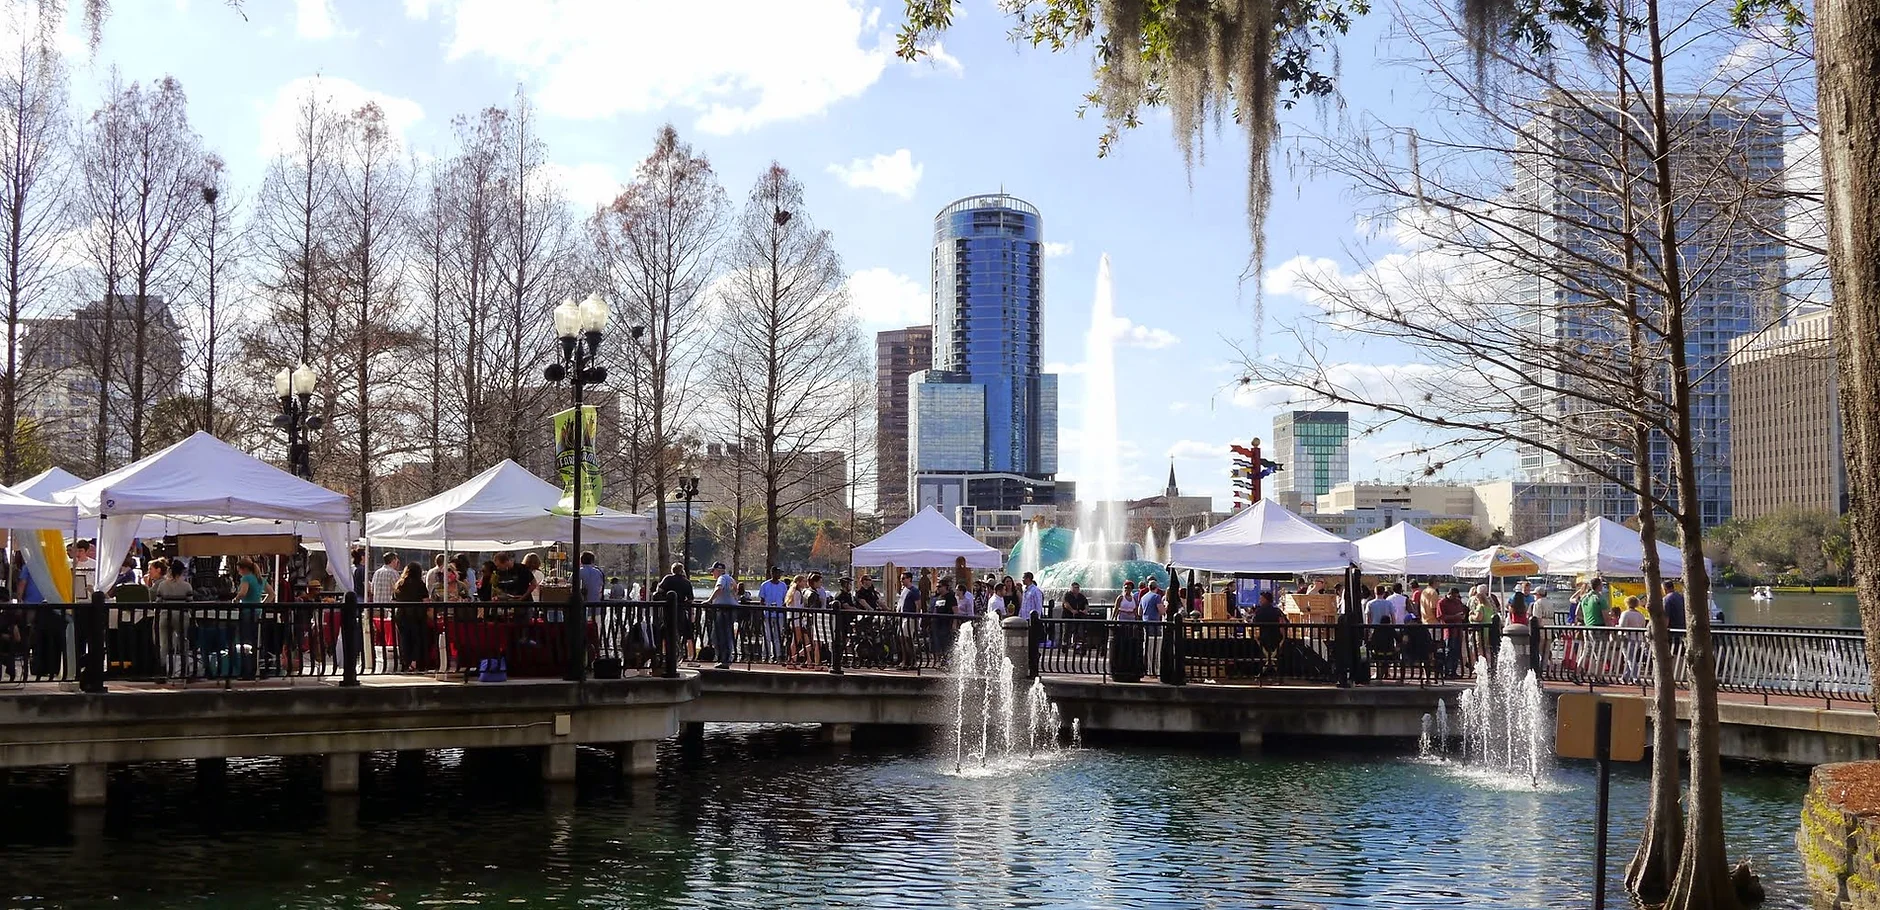 farmers market tents and downtown orlando buildings overlooking a lake